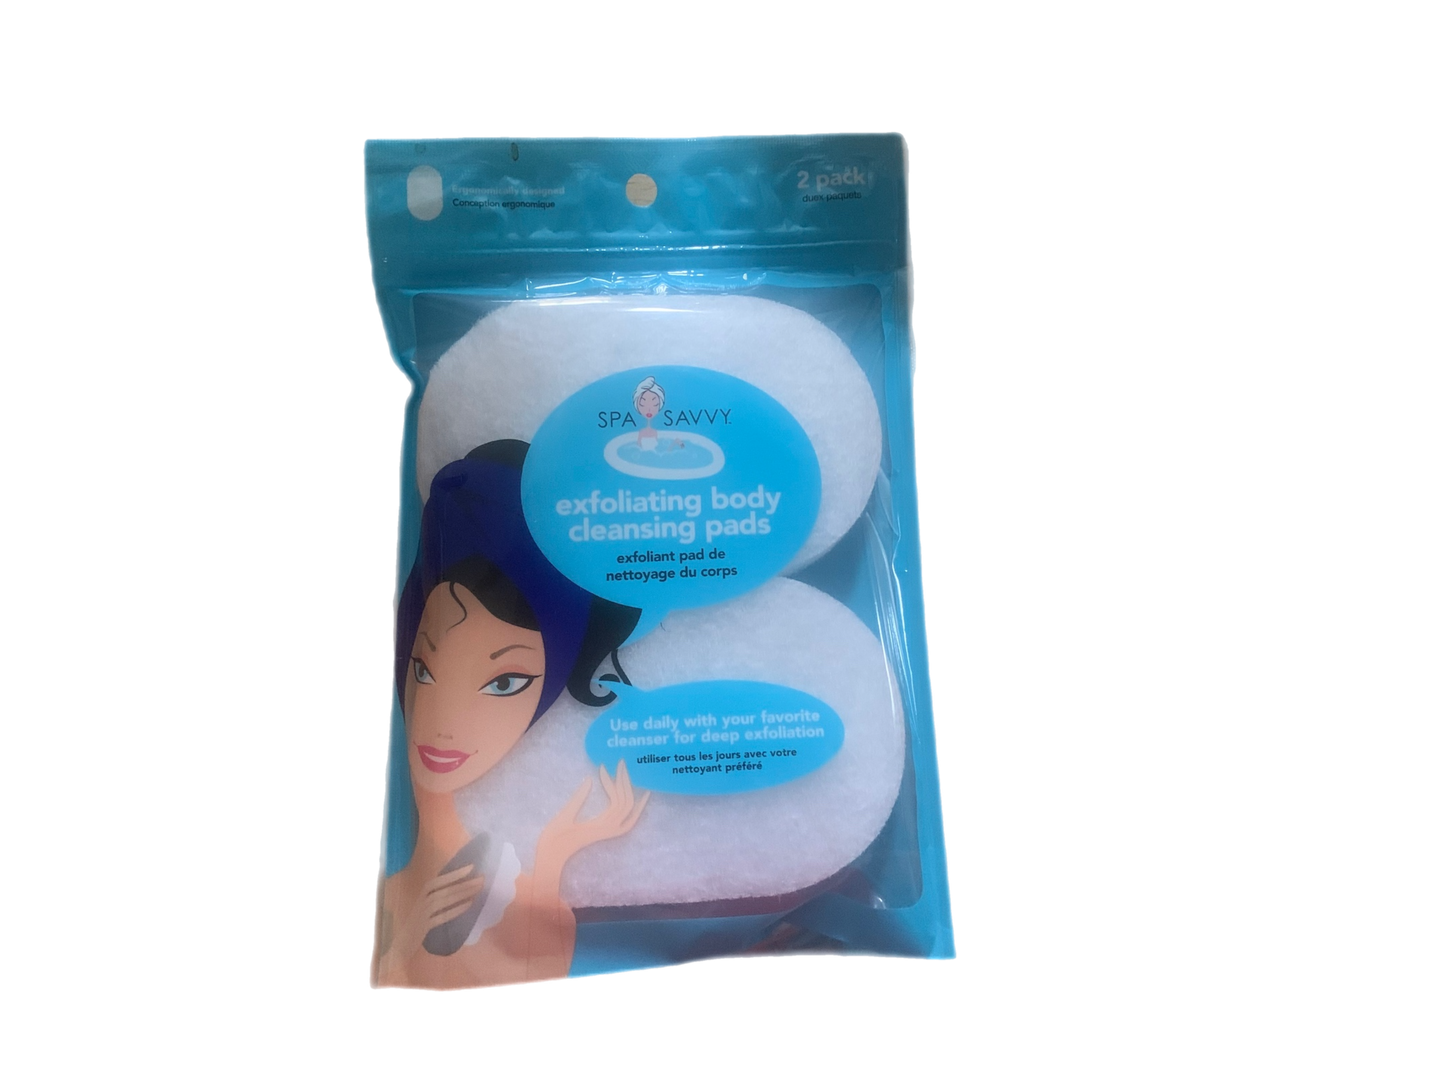 Exfoliating Body Cleansing Pads